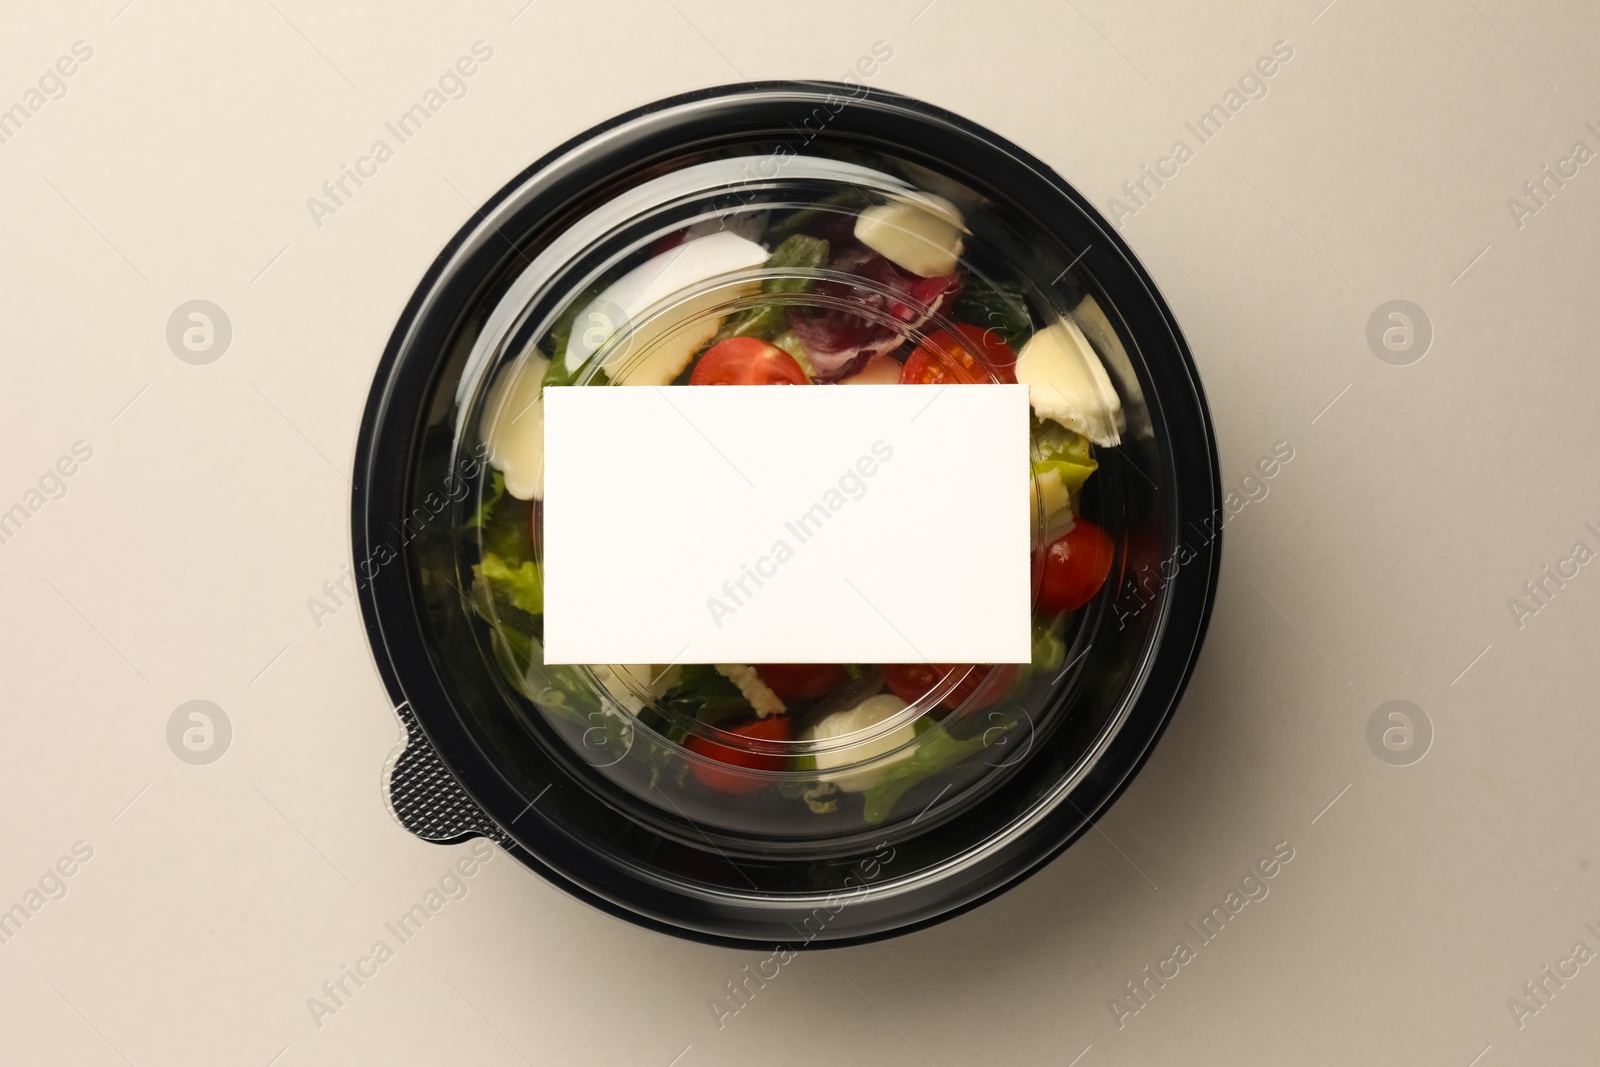 Photo of Tasty food in container on light background, top view. Space for text